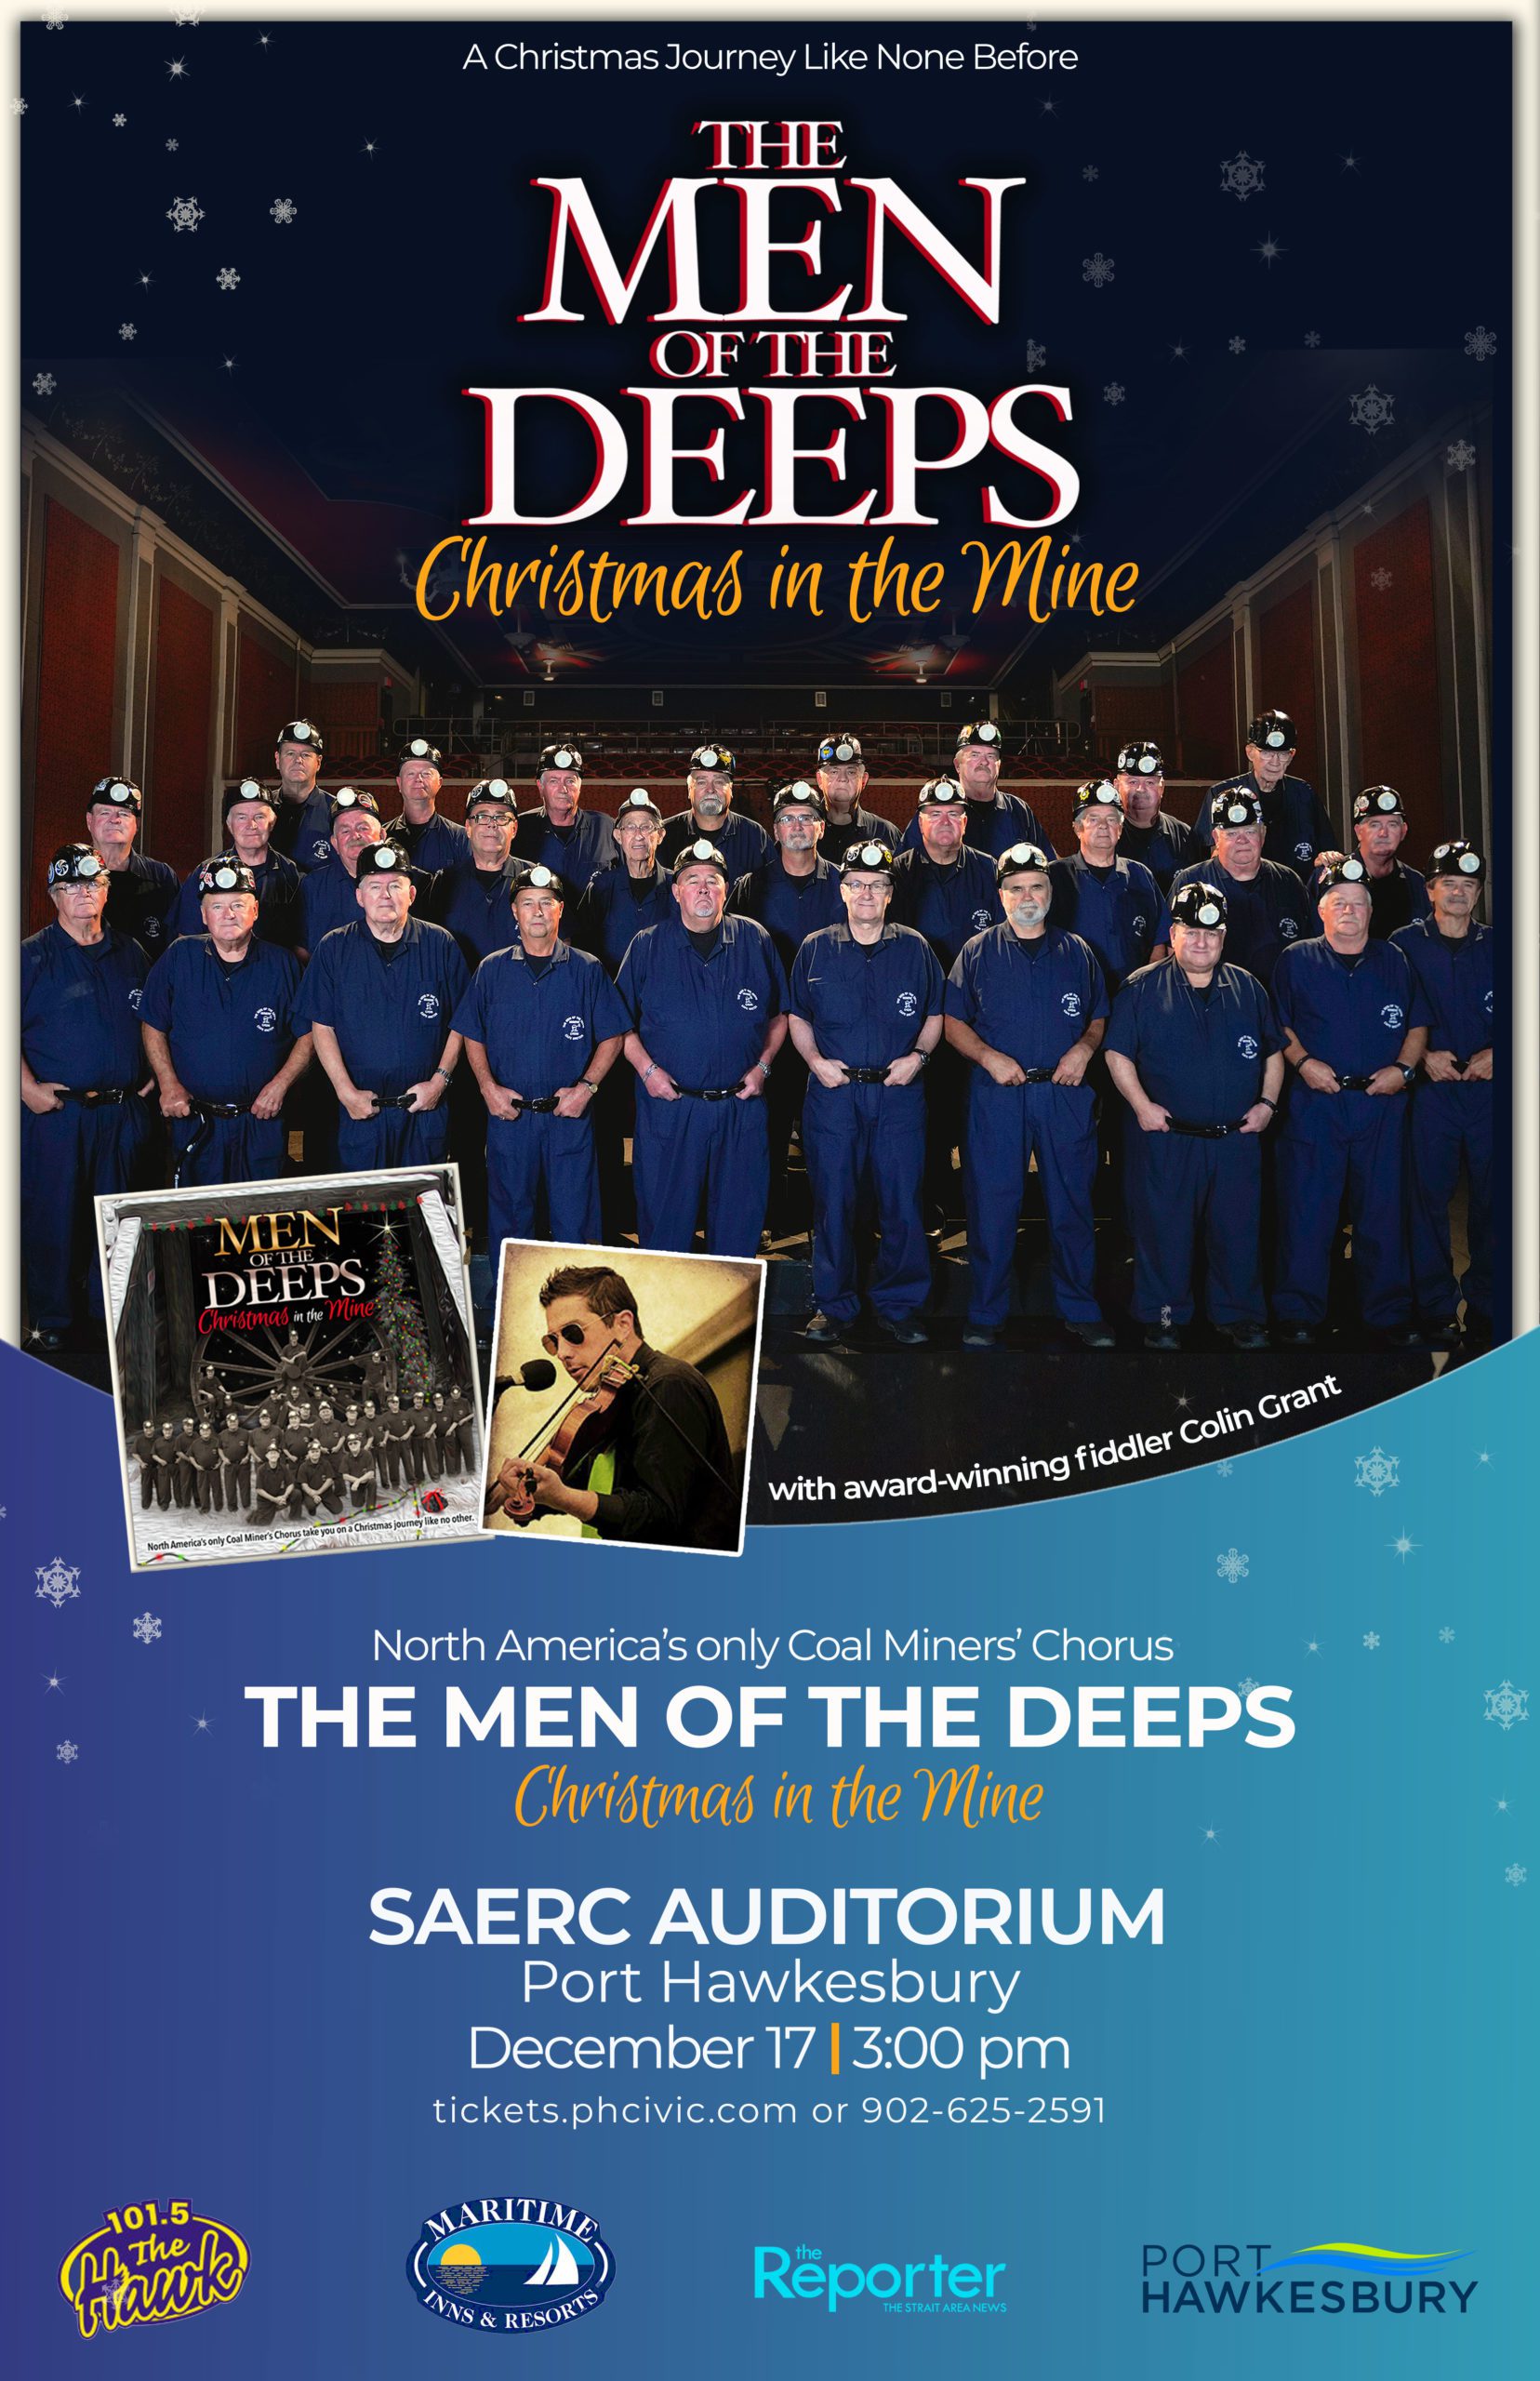 Show Announcement: The Men of the Deeps-Christmas in the Mine with Colin Grant